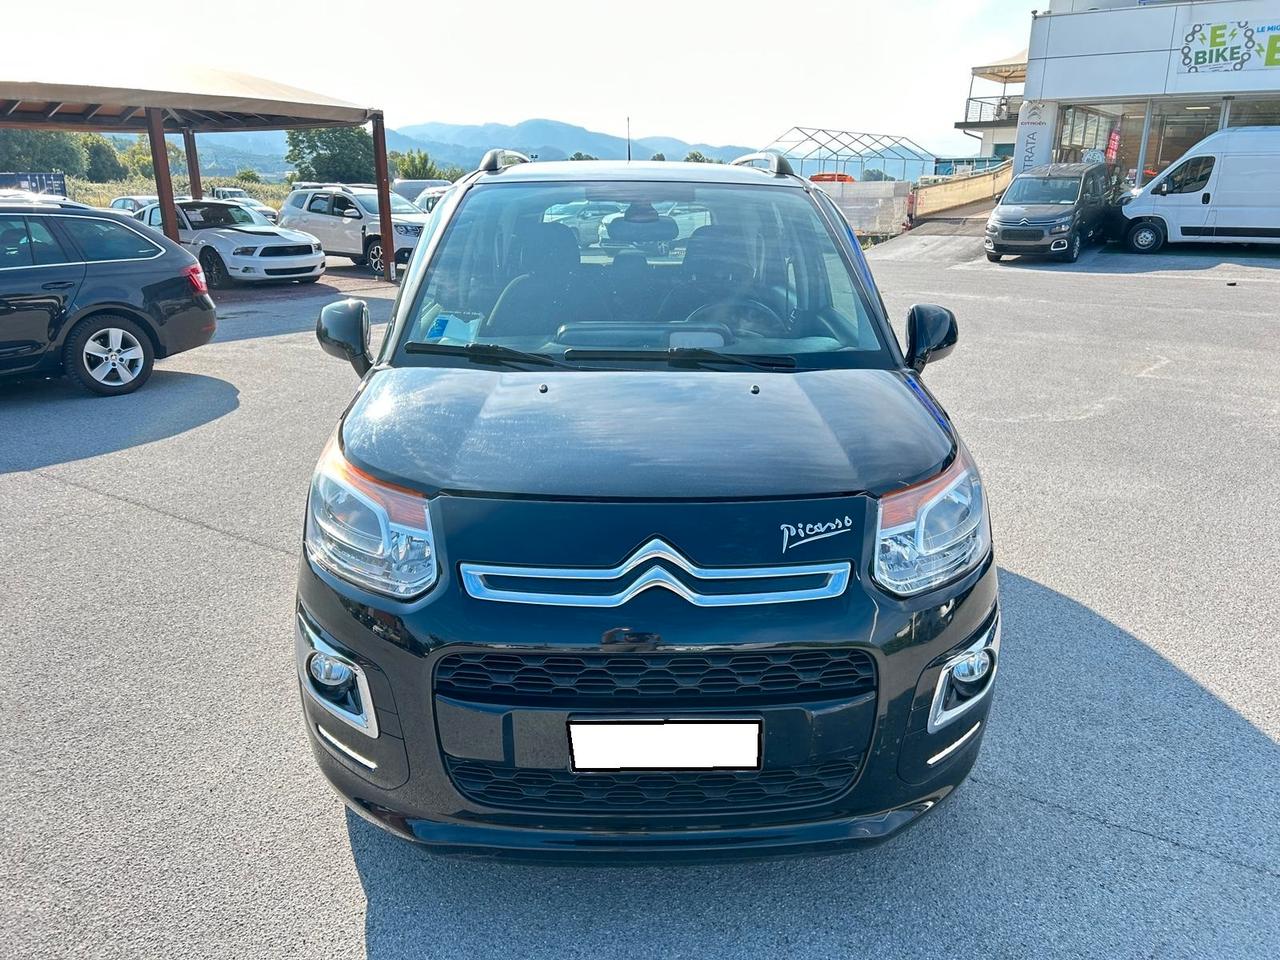 Citroen C3 Picasso C3 Picasso 1.6 HDi 90 Exclusive Limited